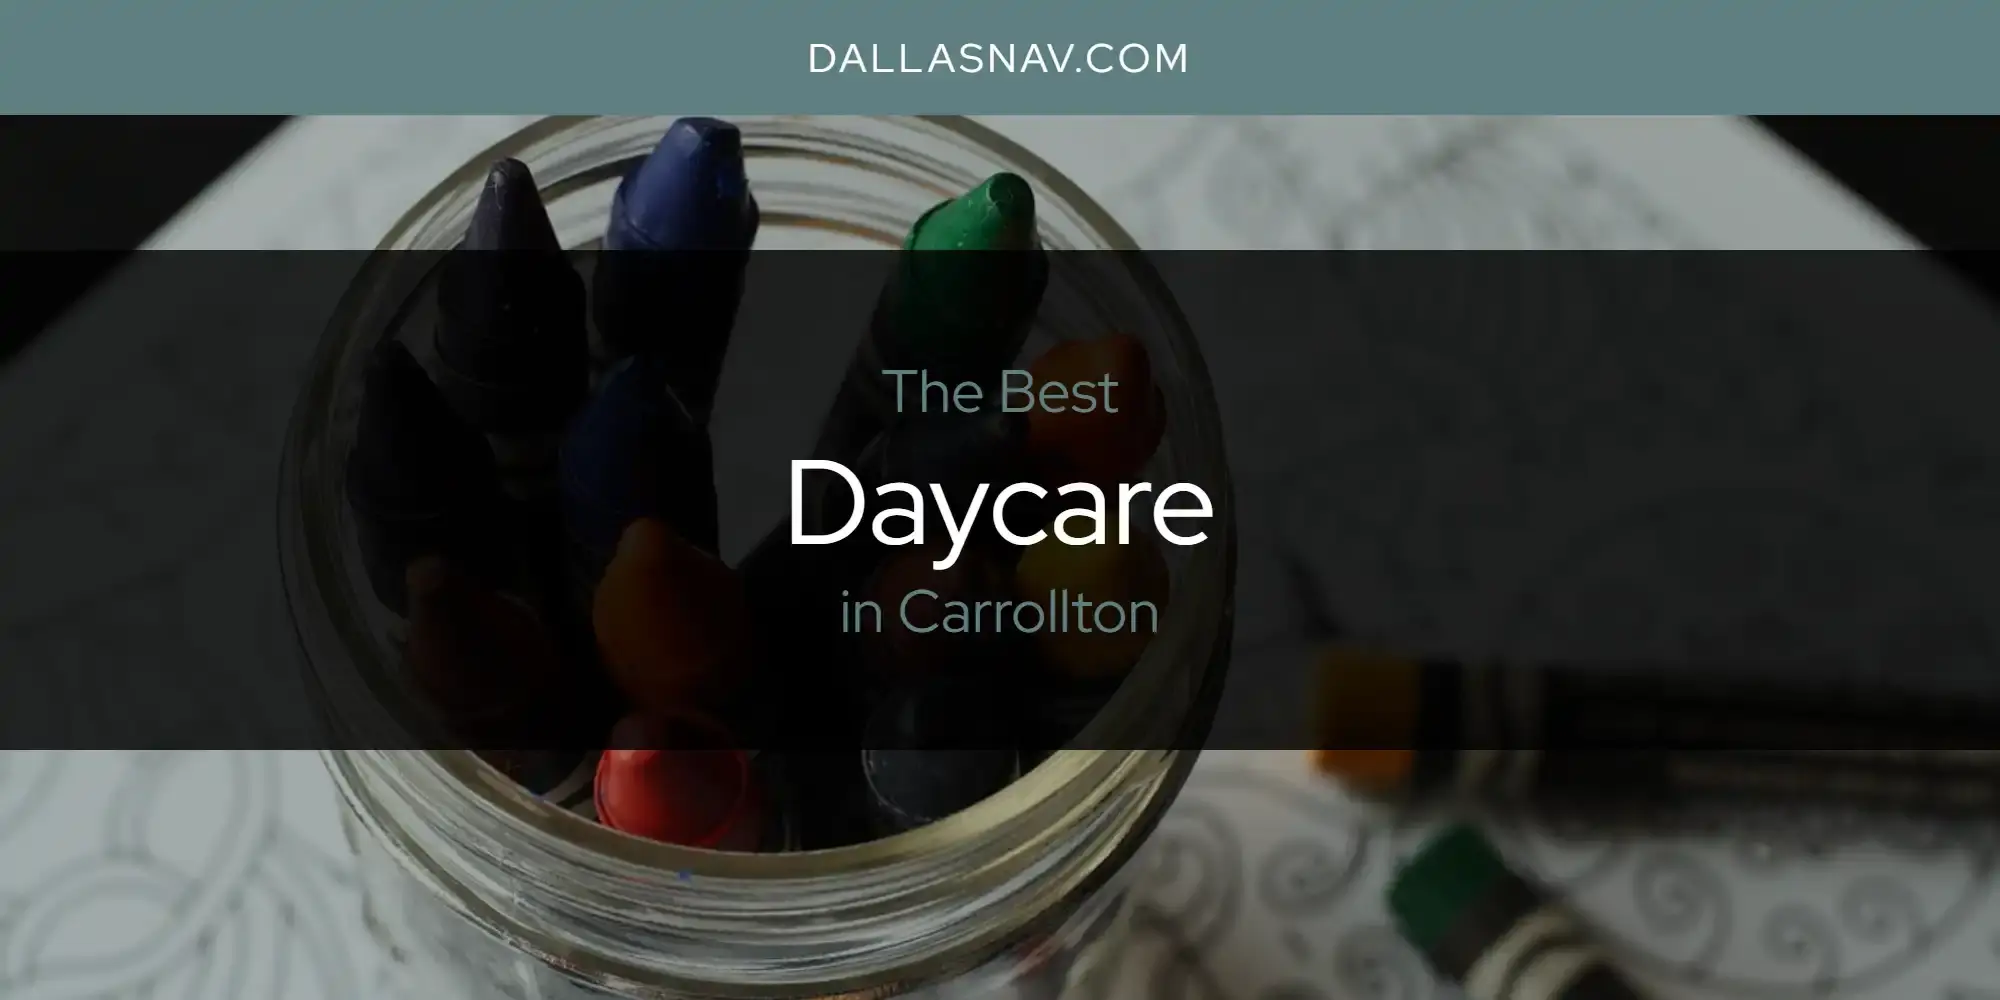 Best Daycare in Carrollton? Here's the Top 6